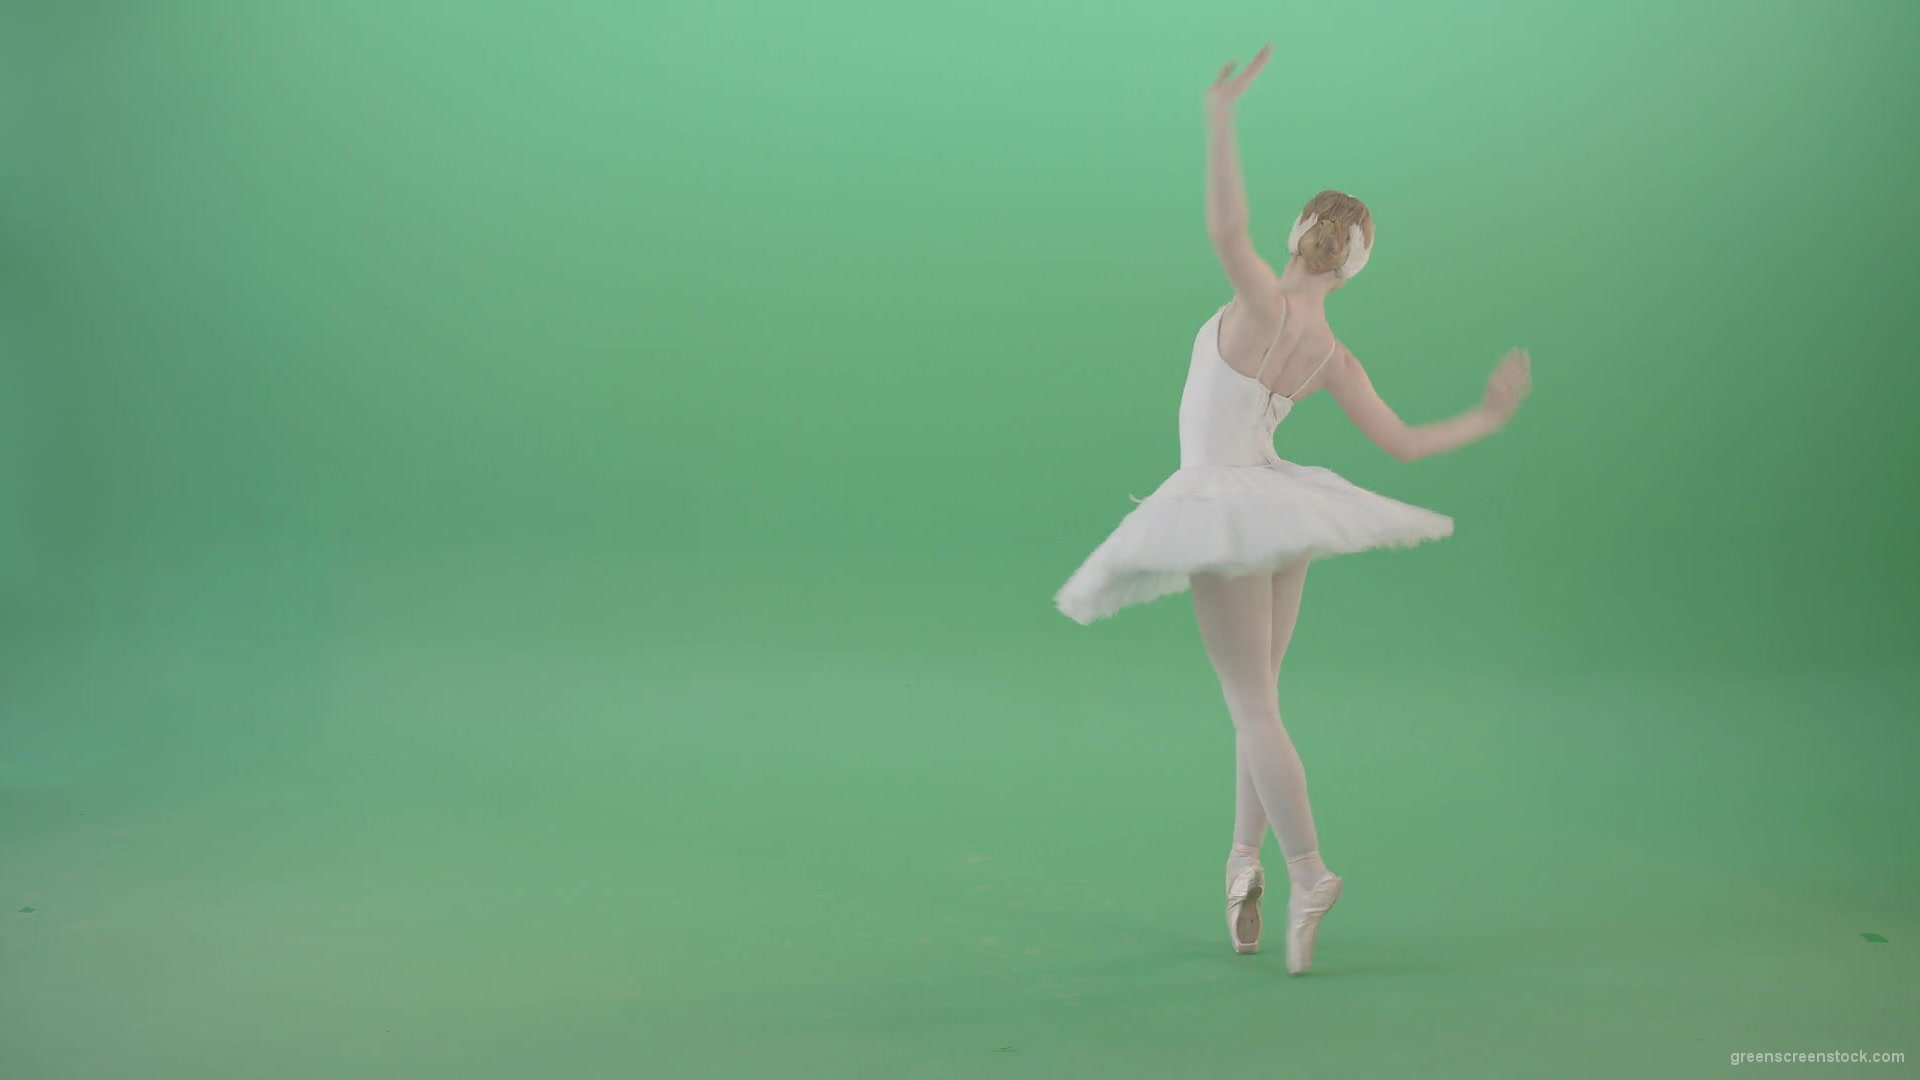 Luxury-ballet-girl-ballerina-flying-in-the-sky-and-waving-hands-on-green-screen-4K-Video-Footage-1920_007 Green Screen Stock